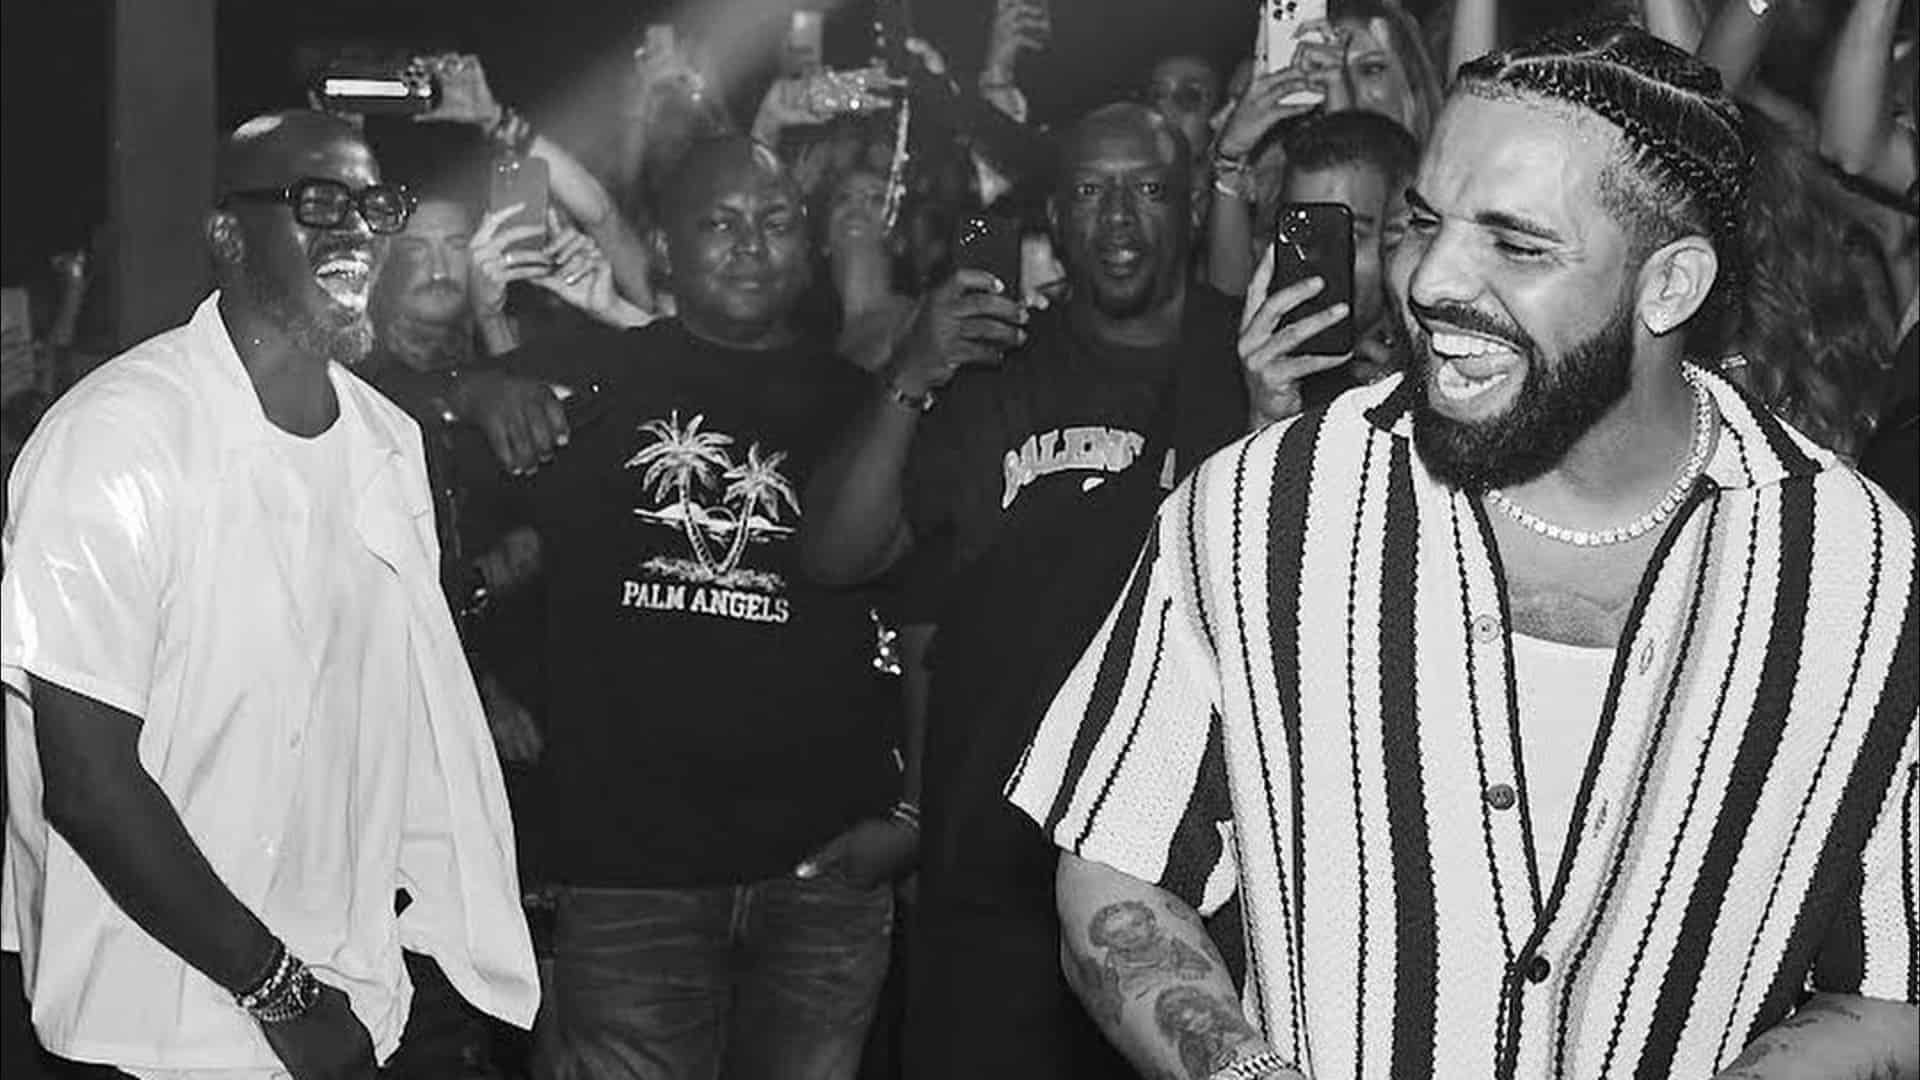 Drake joins Black Coffee at Hï Ibiza in surprise appearance: Watch